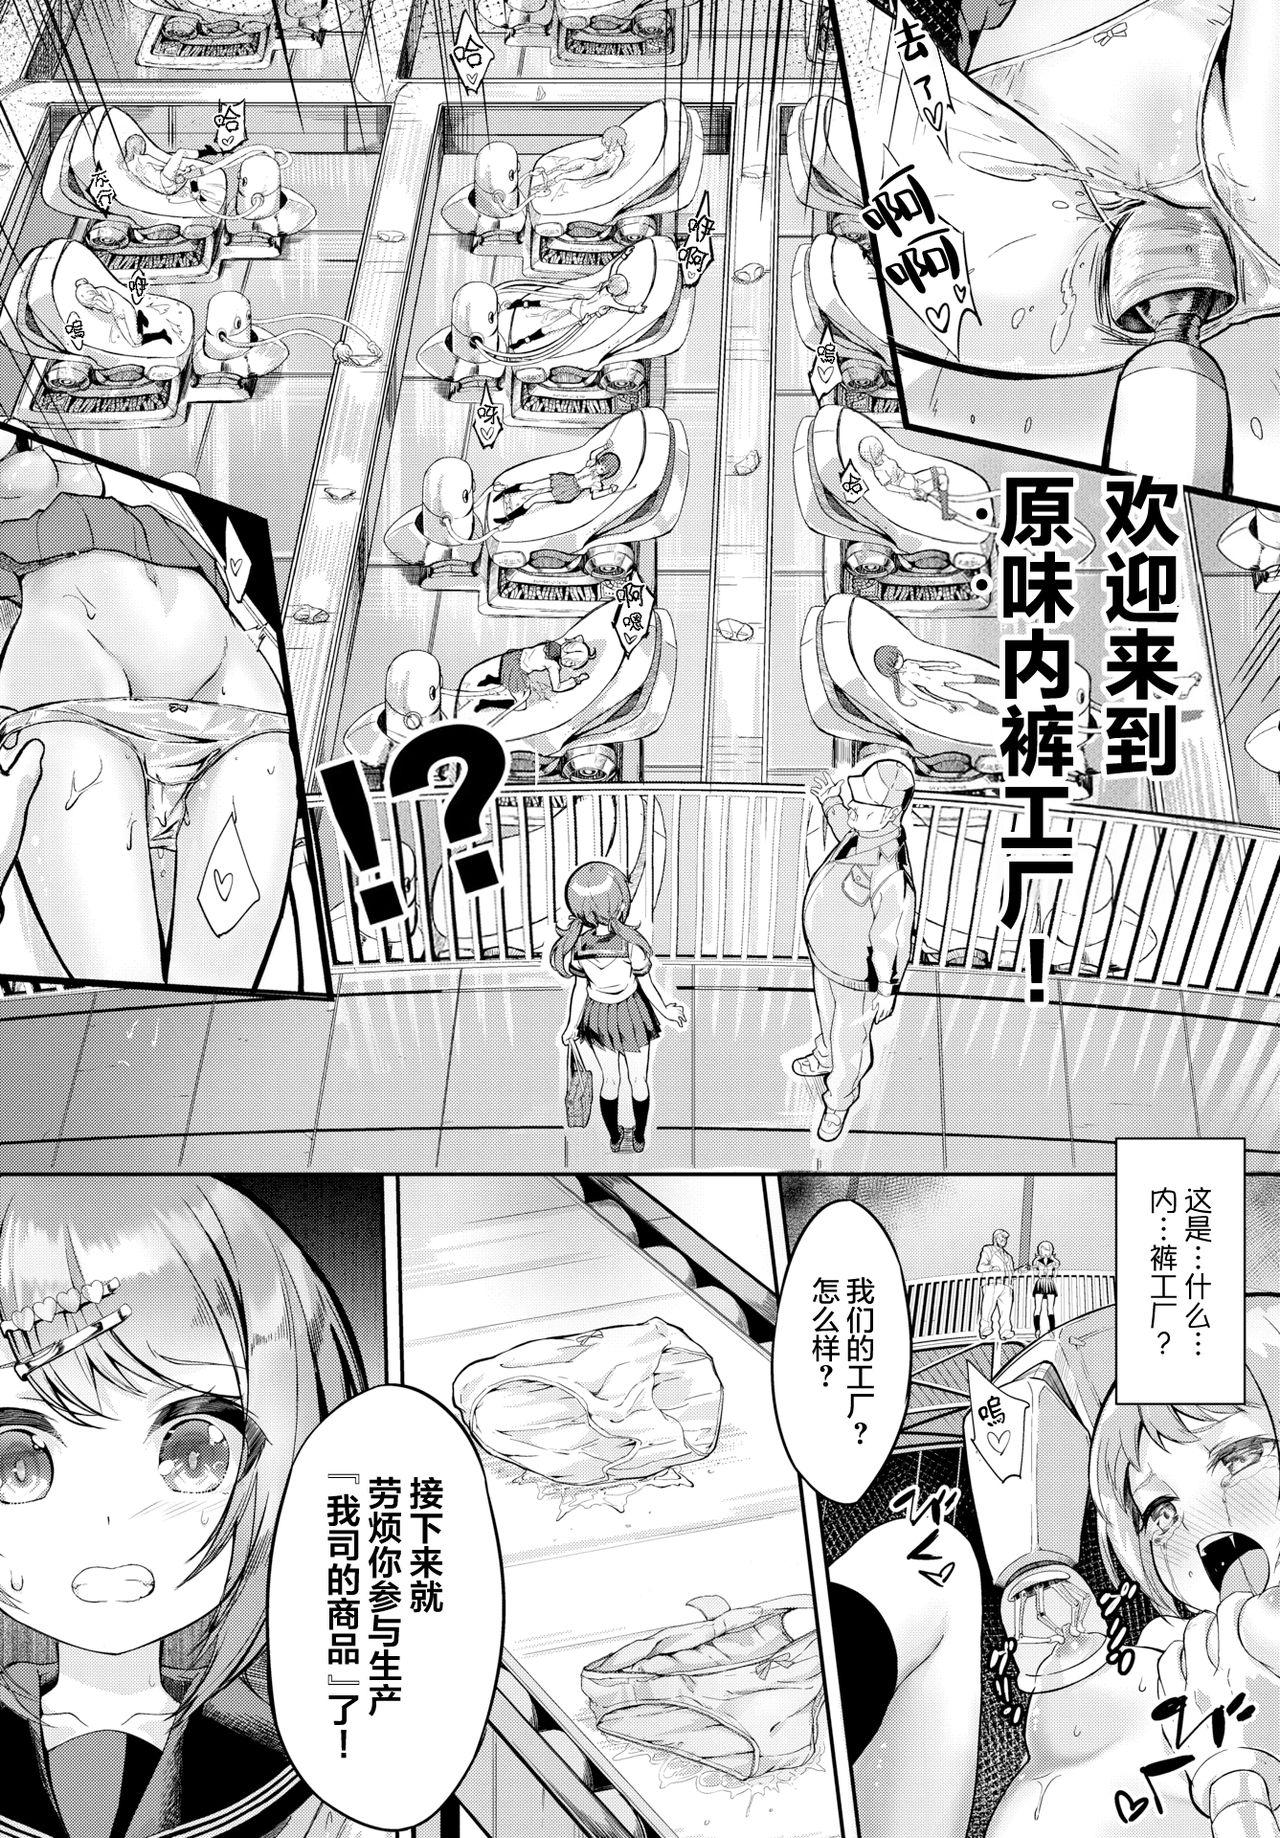 Interacial Soreike! Pan Koujou! - Go for it! the Bread factory! Pussy Fucking - Page 3